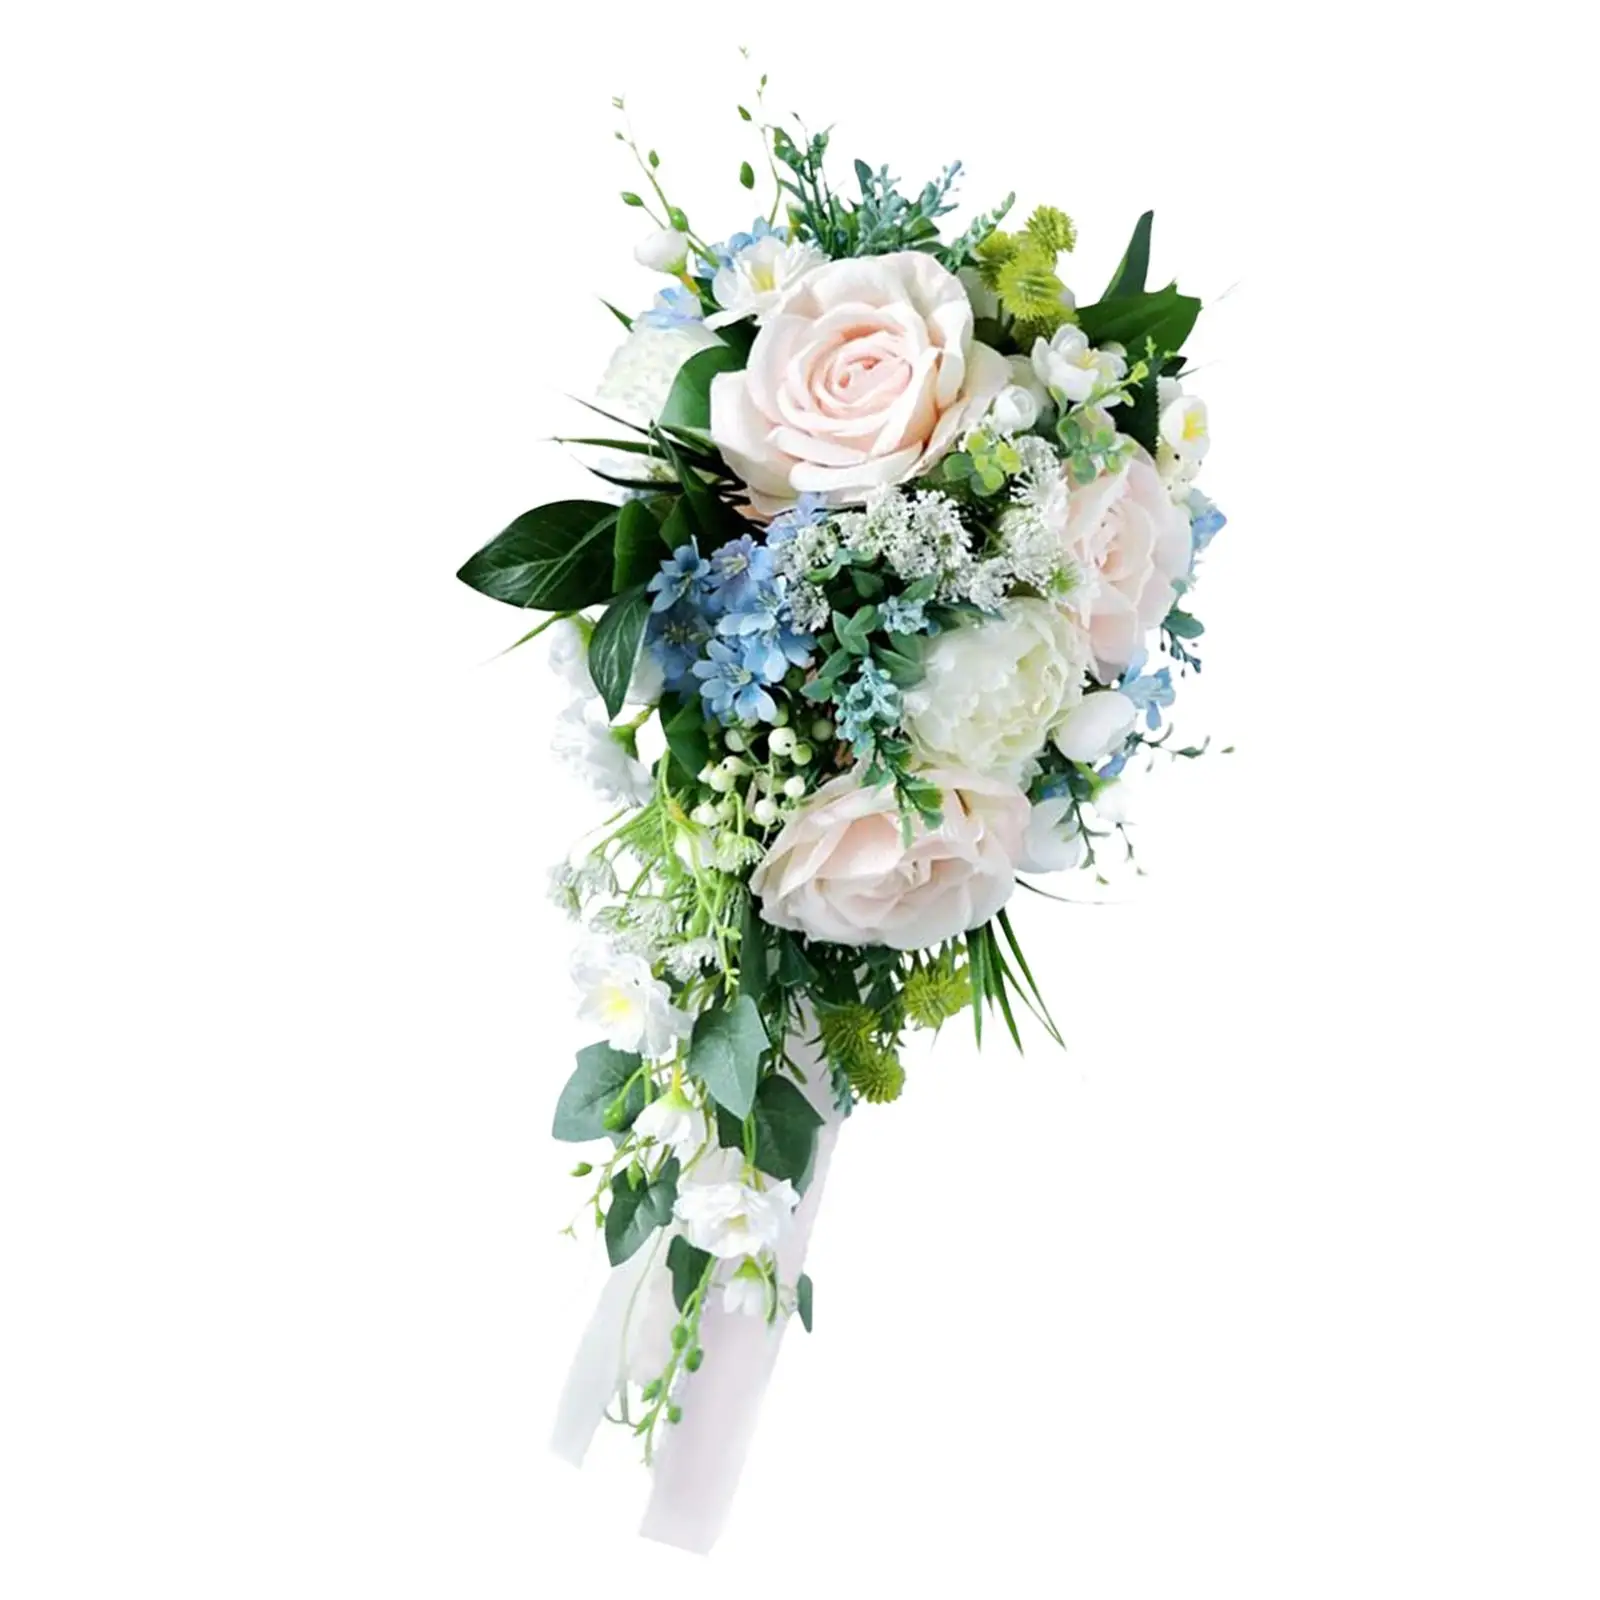 Romantic Wedding Bride Bouquet Waterfall Flowers with Green Leaves Artificial Flowers for Church Festival Ceremony Supplies